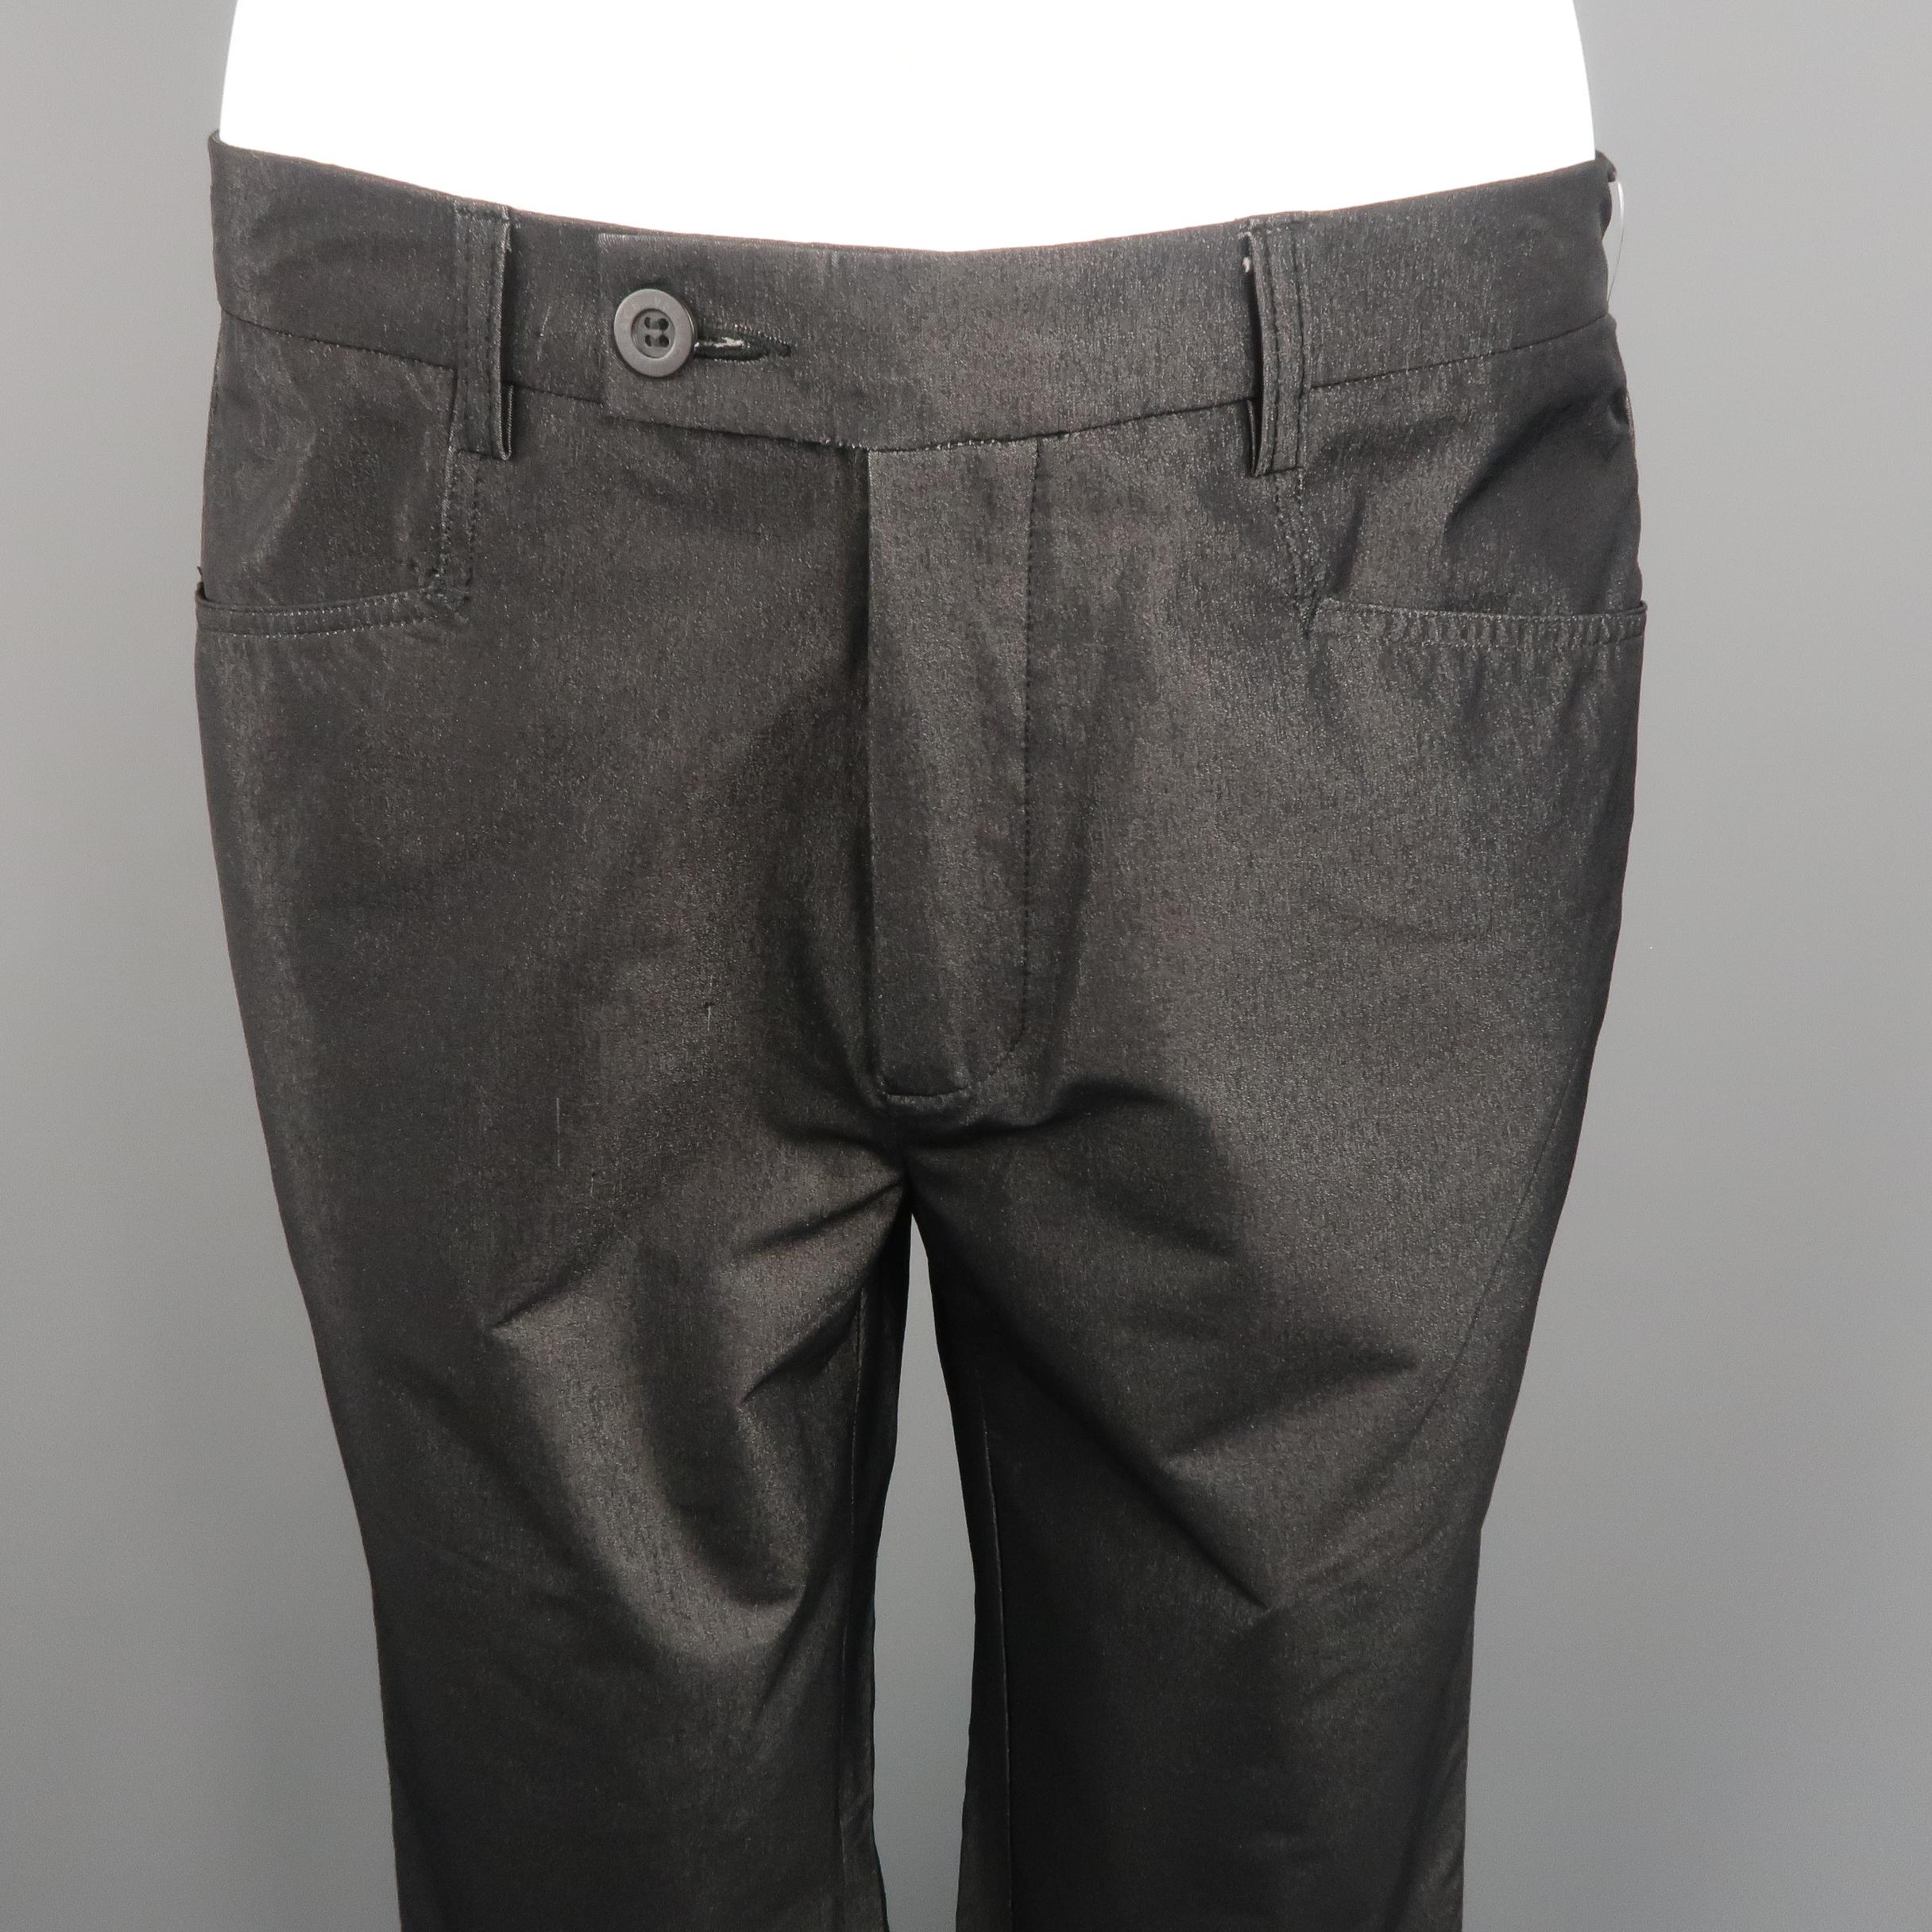 GIANNI VERSACE dress pants come in metallic charcoal tone, cotton blend material with waistband, piped pockets and zip fly. Small signals of use, with minor pilling on the right side of the front. Made in Italy.
 
Excellent Pre-Owned